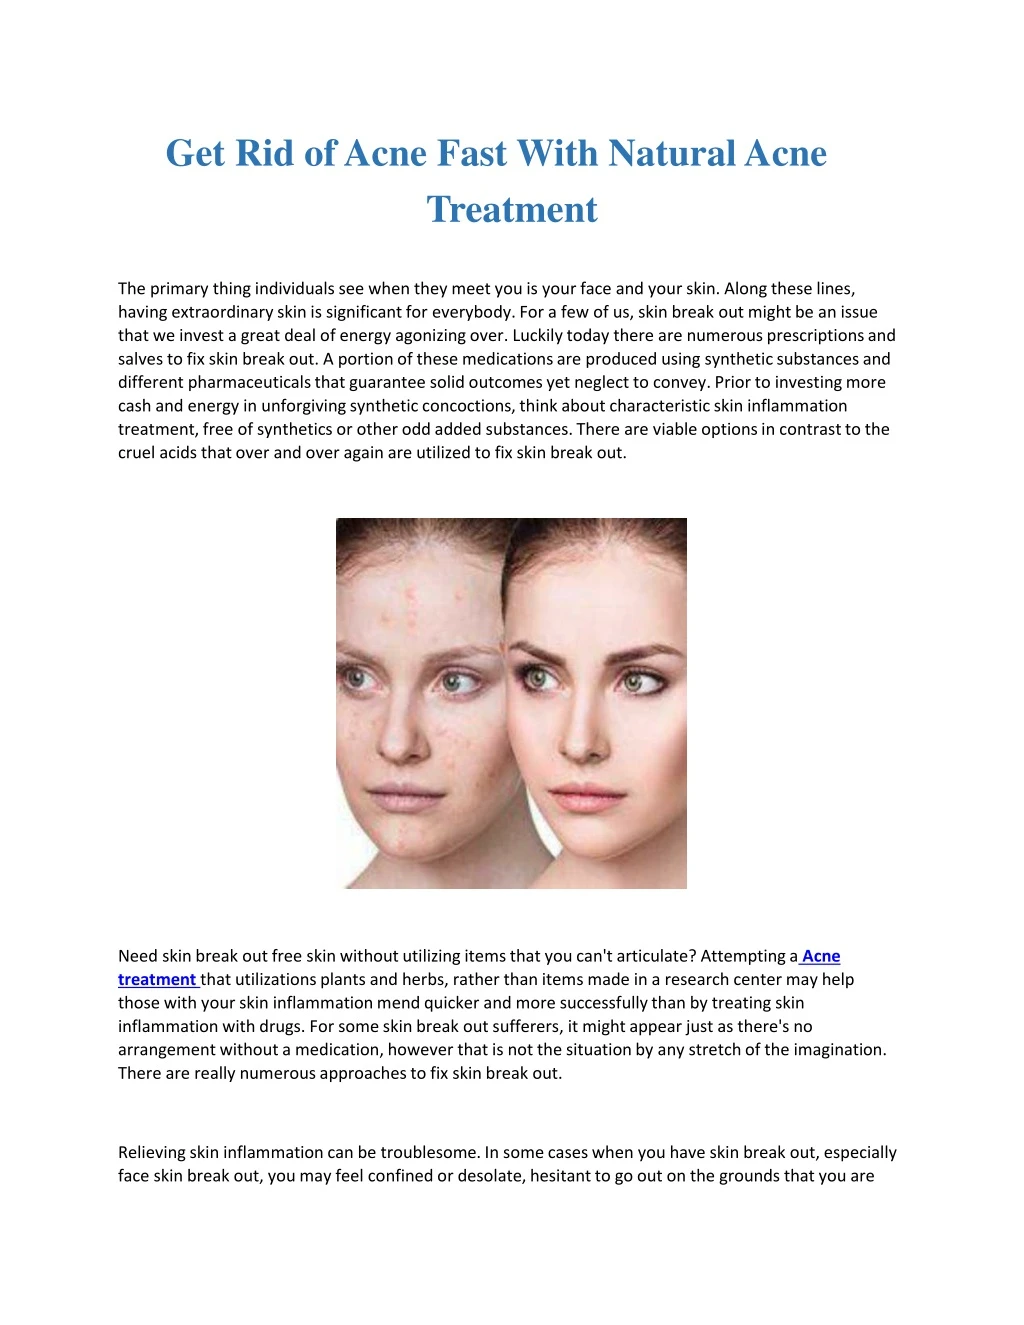 get rid of acne fast with natural acne treatment